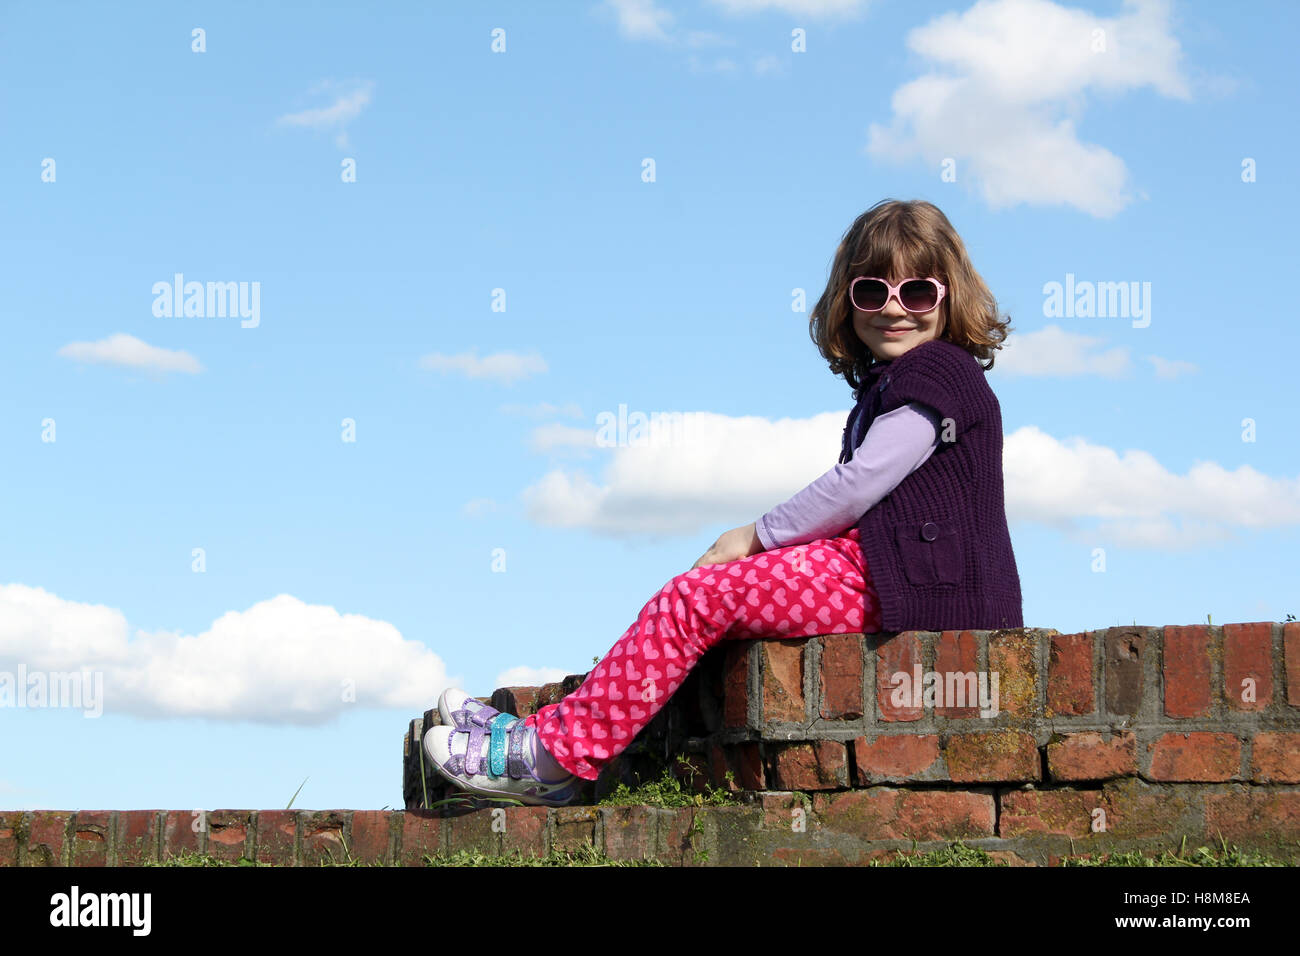 cute little girl with sunglasses Stock Photo